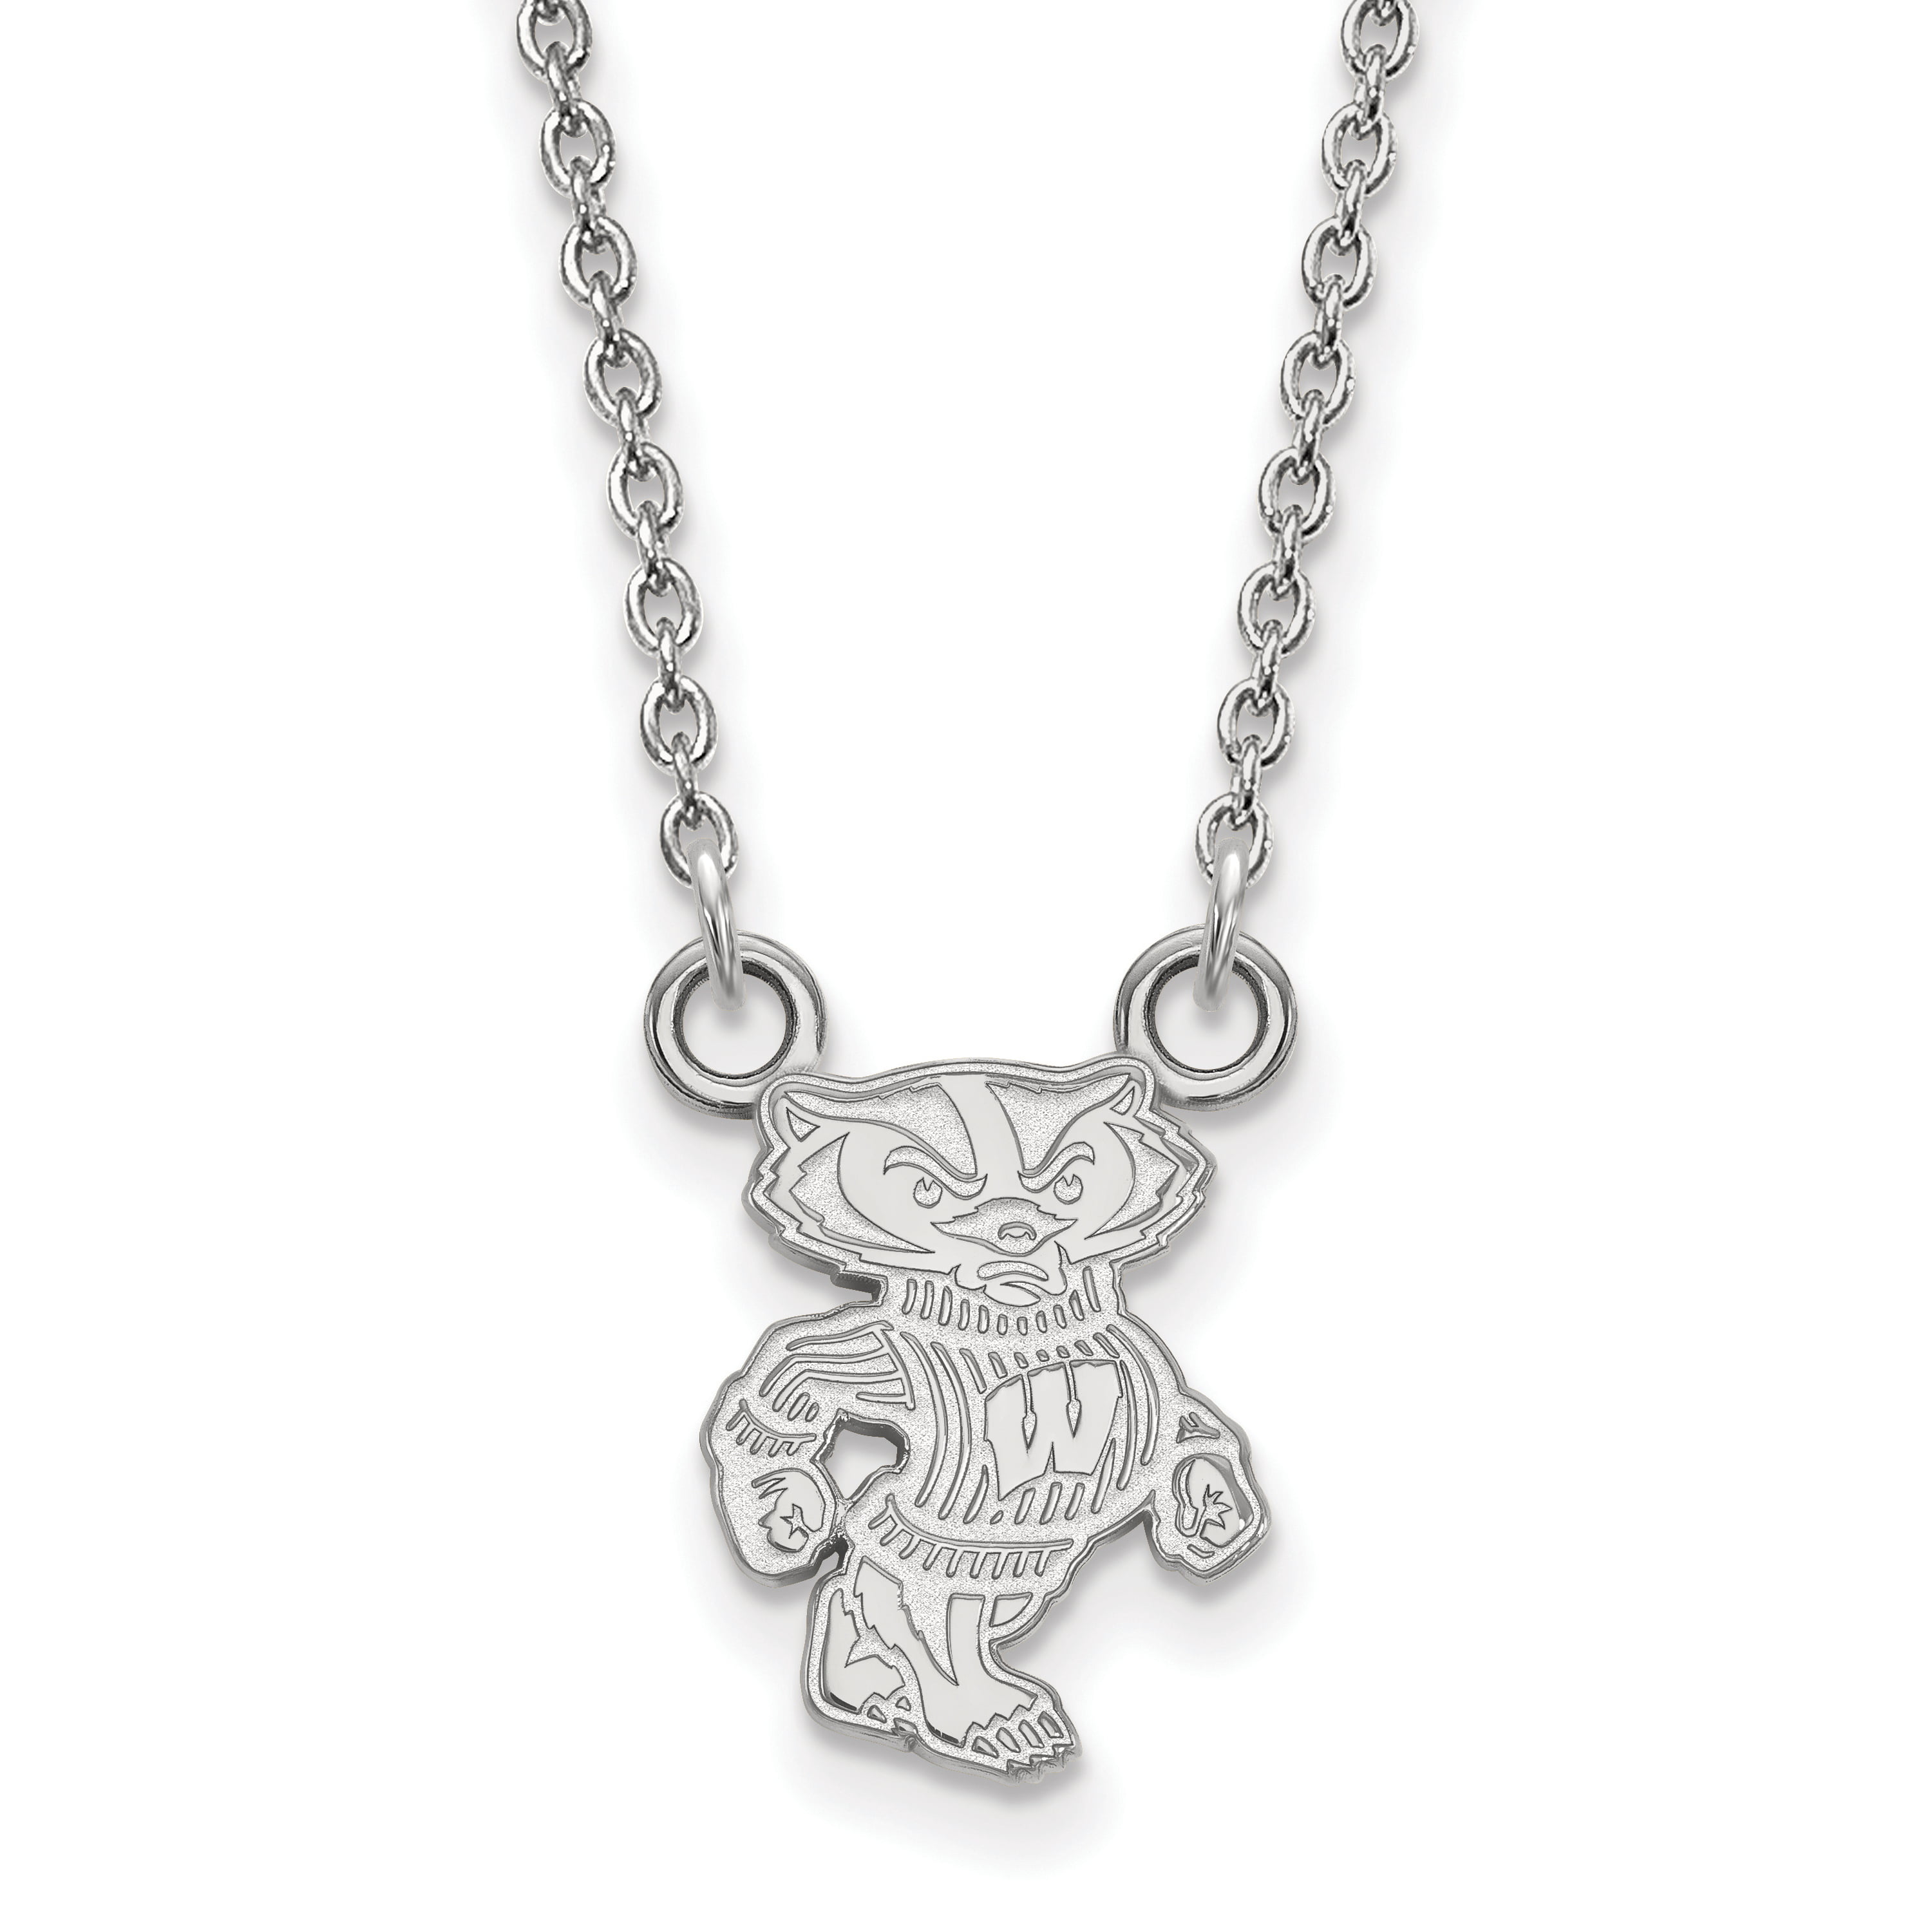 University of Wisconsin Badgers Bucky Mascot Pendant in Sterling Silver